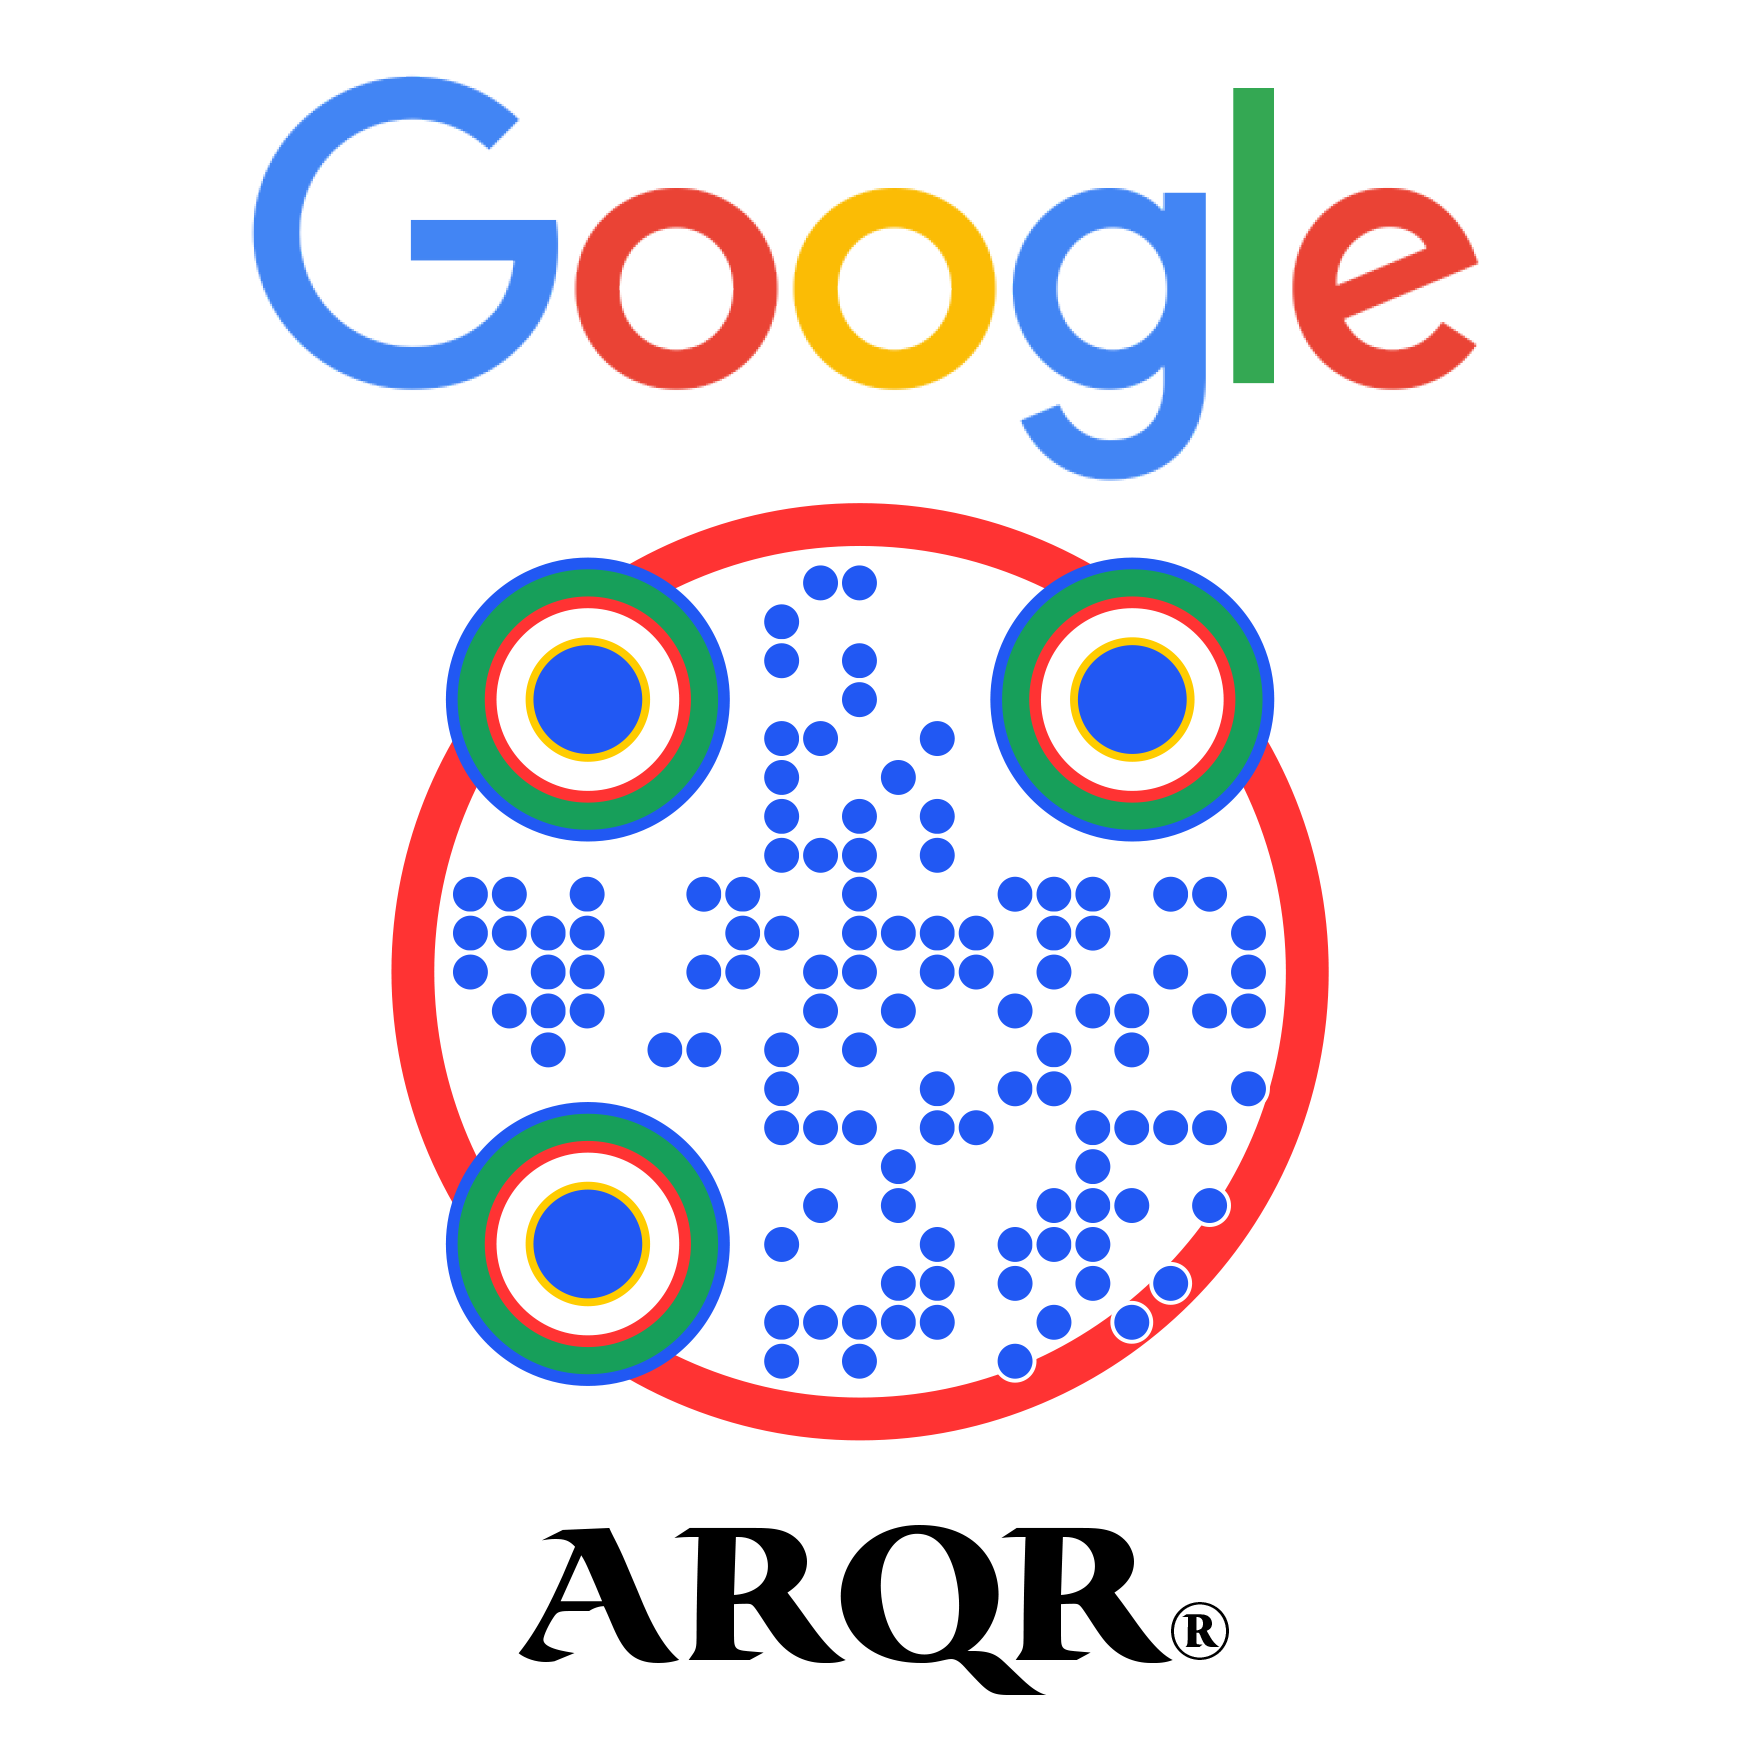 Google ARQR Code by Laird Marynick links to http://bit.ly/Gg5